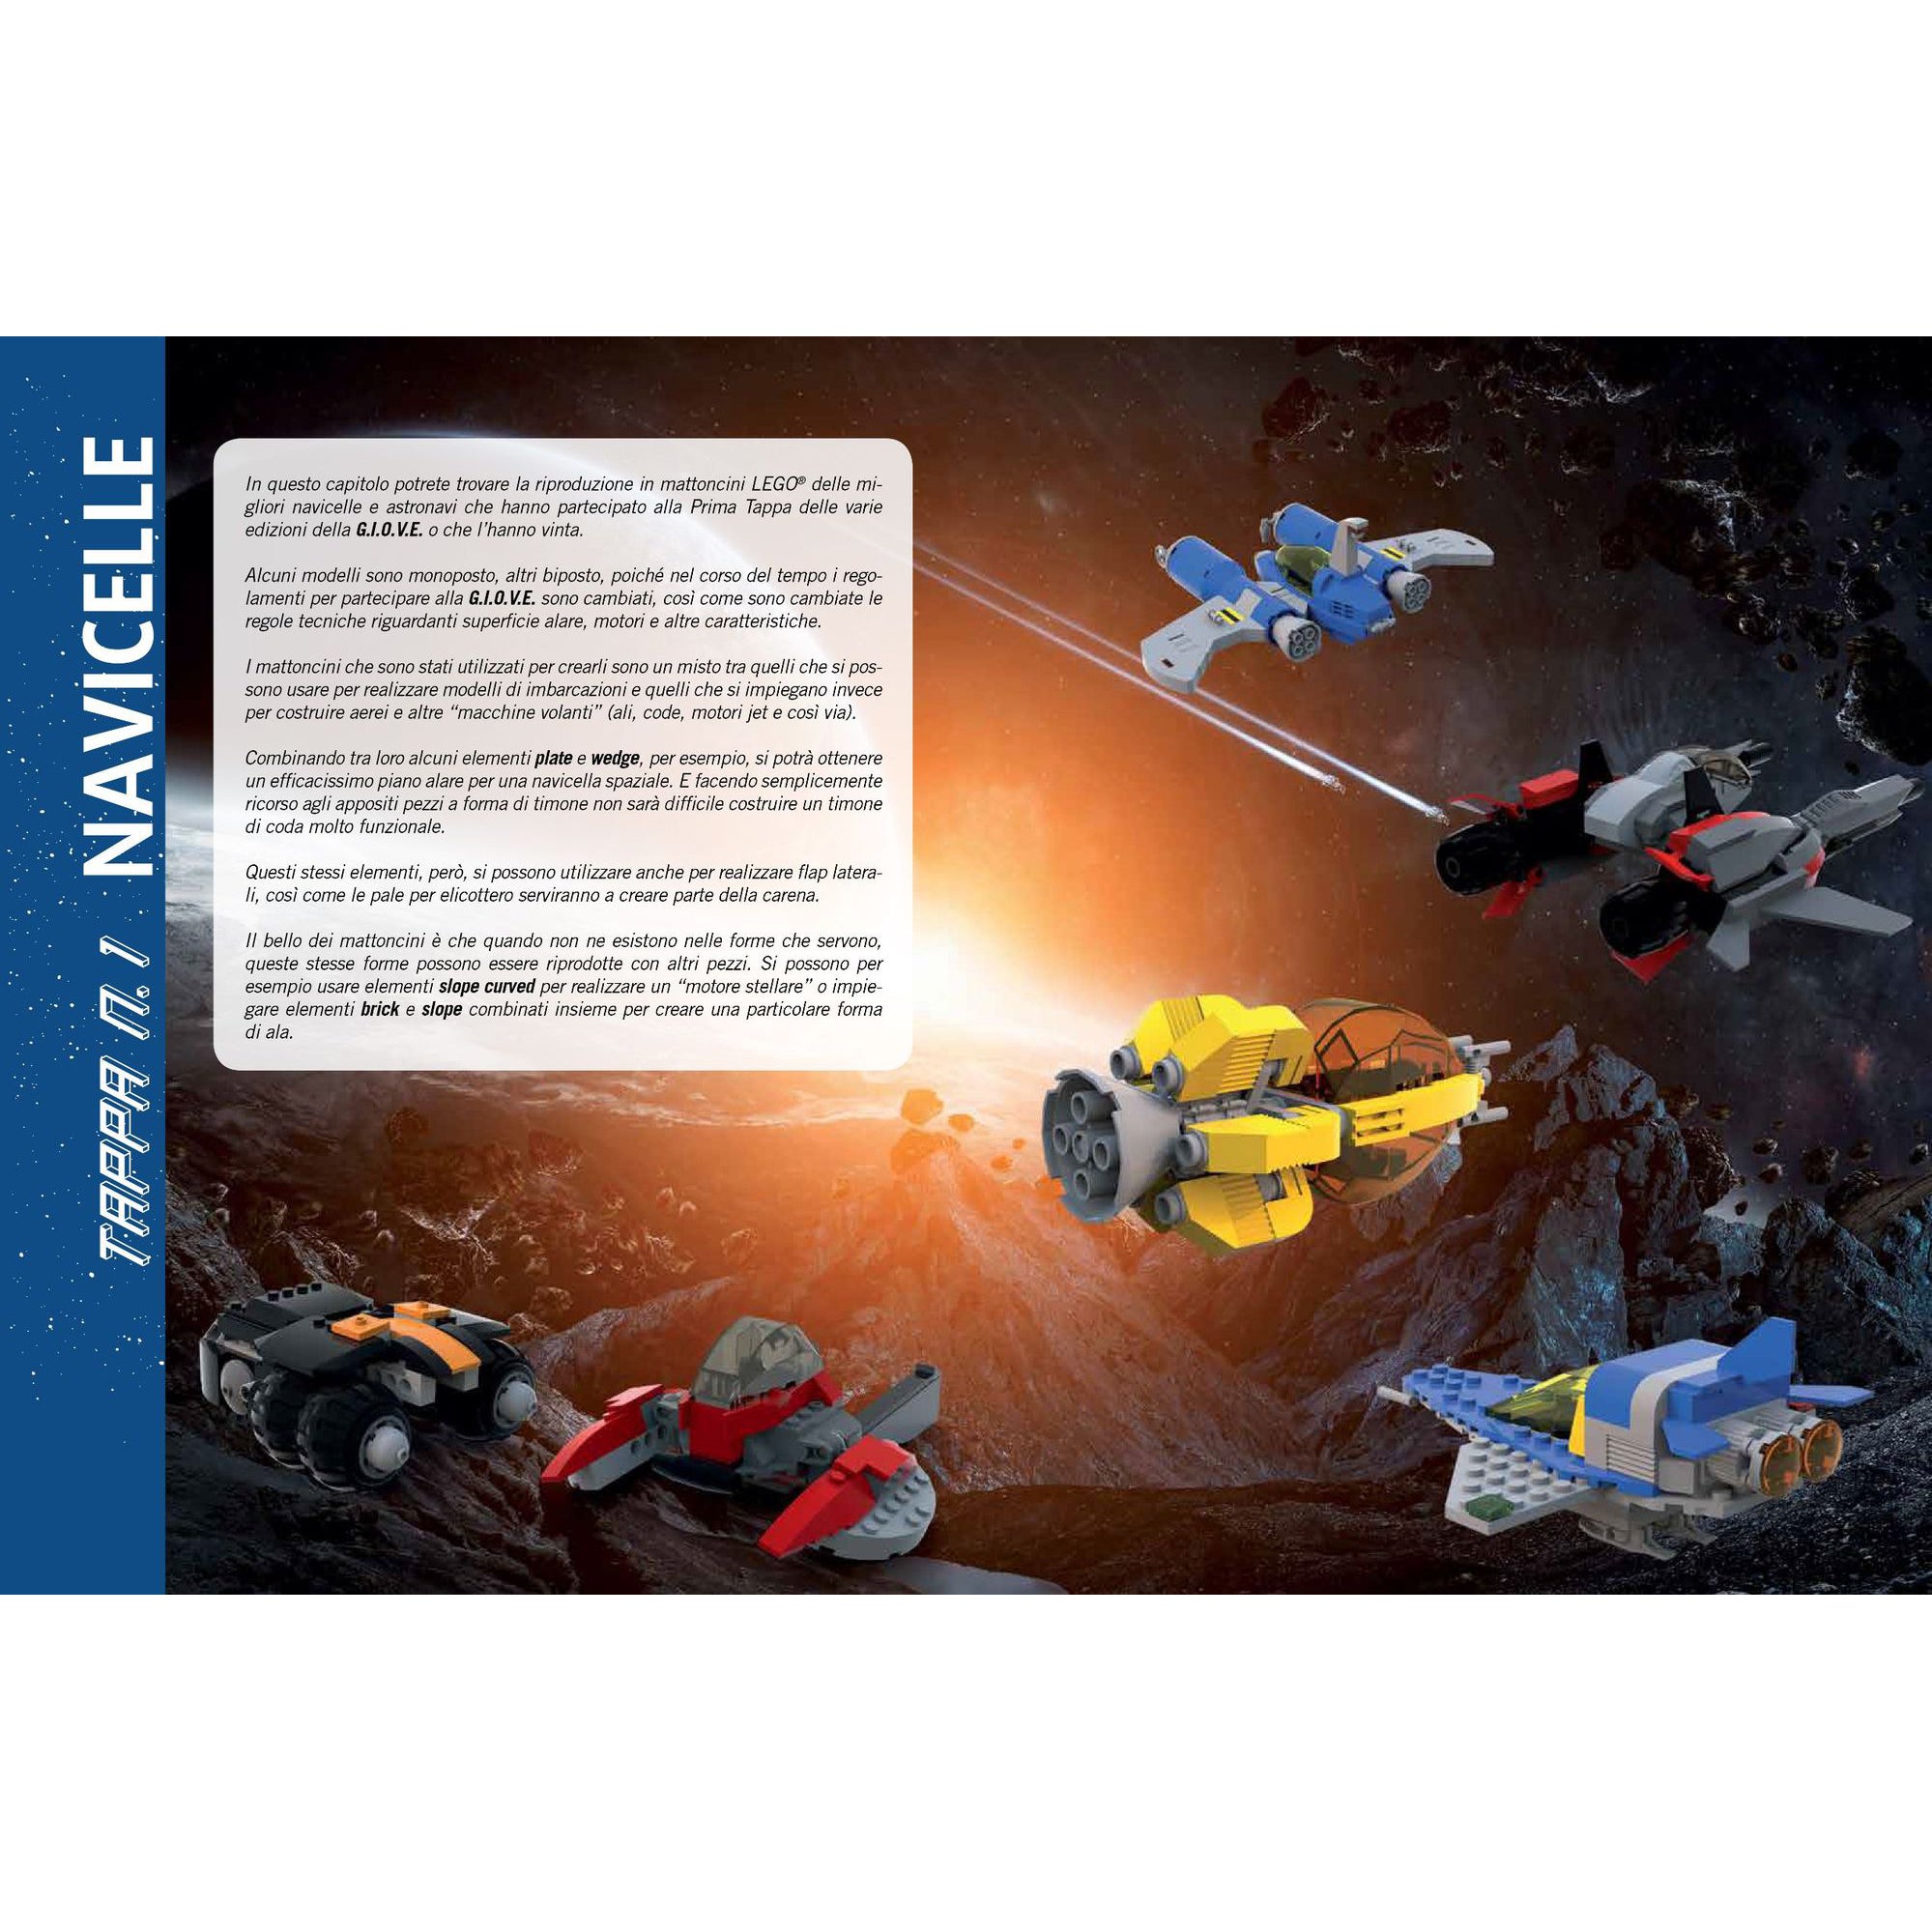 Space adventures - build amazing robots and spaceships with LEGO® bricks